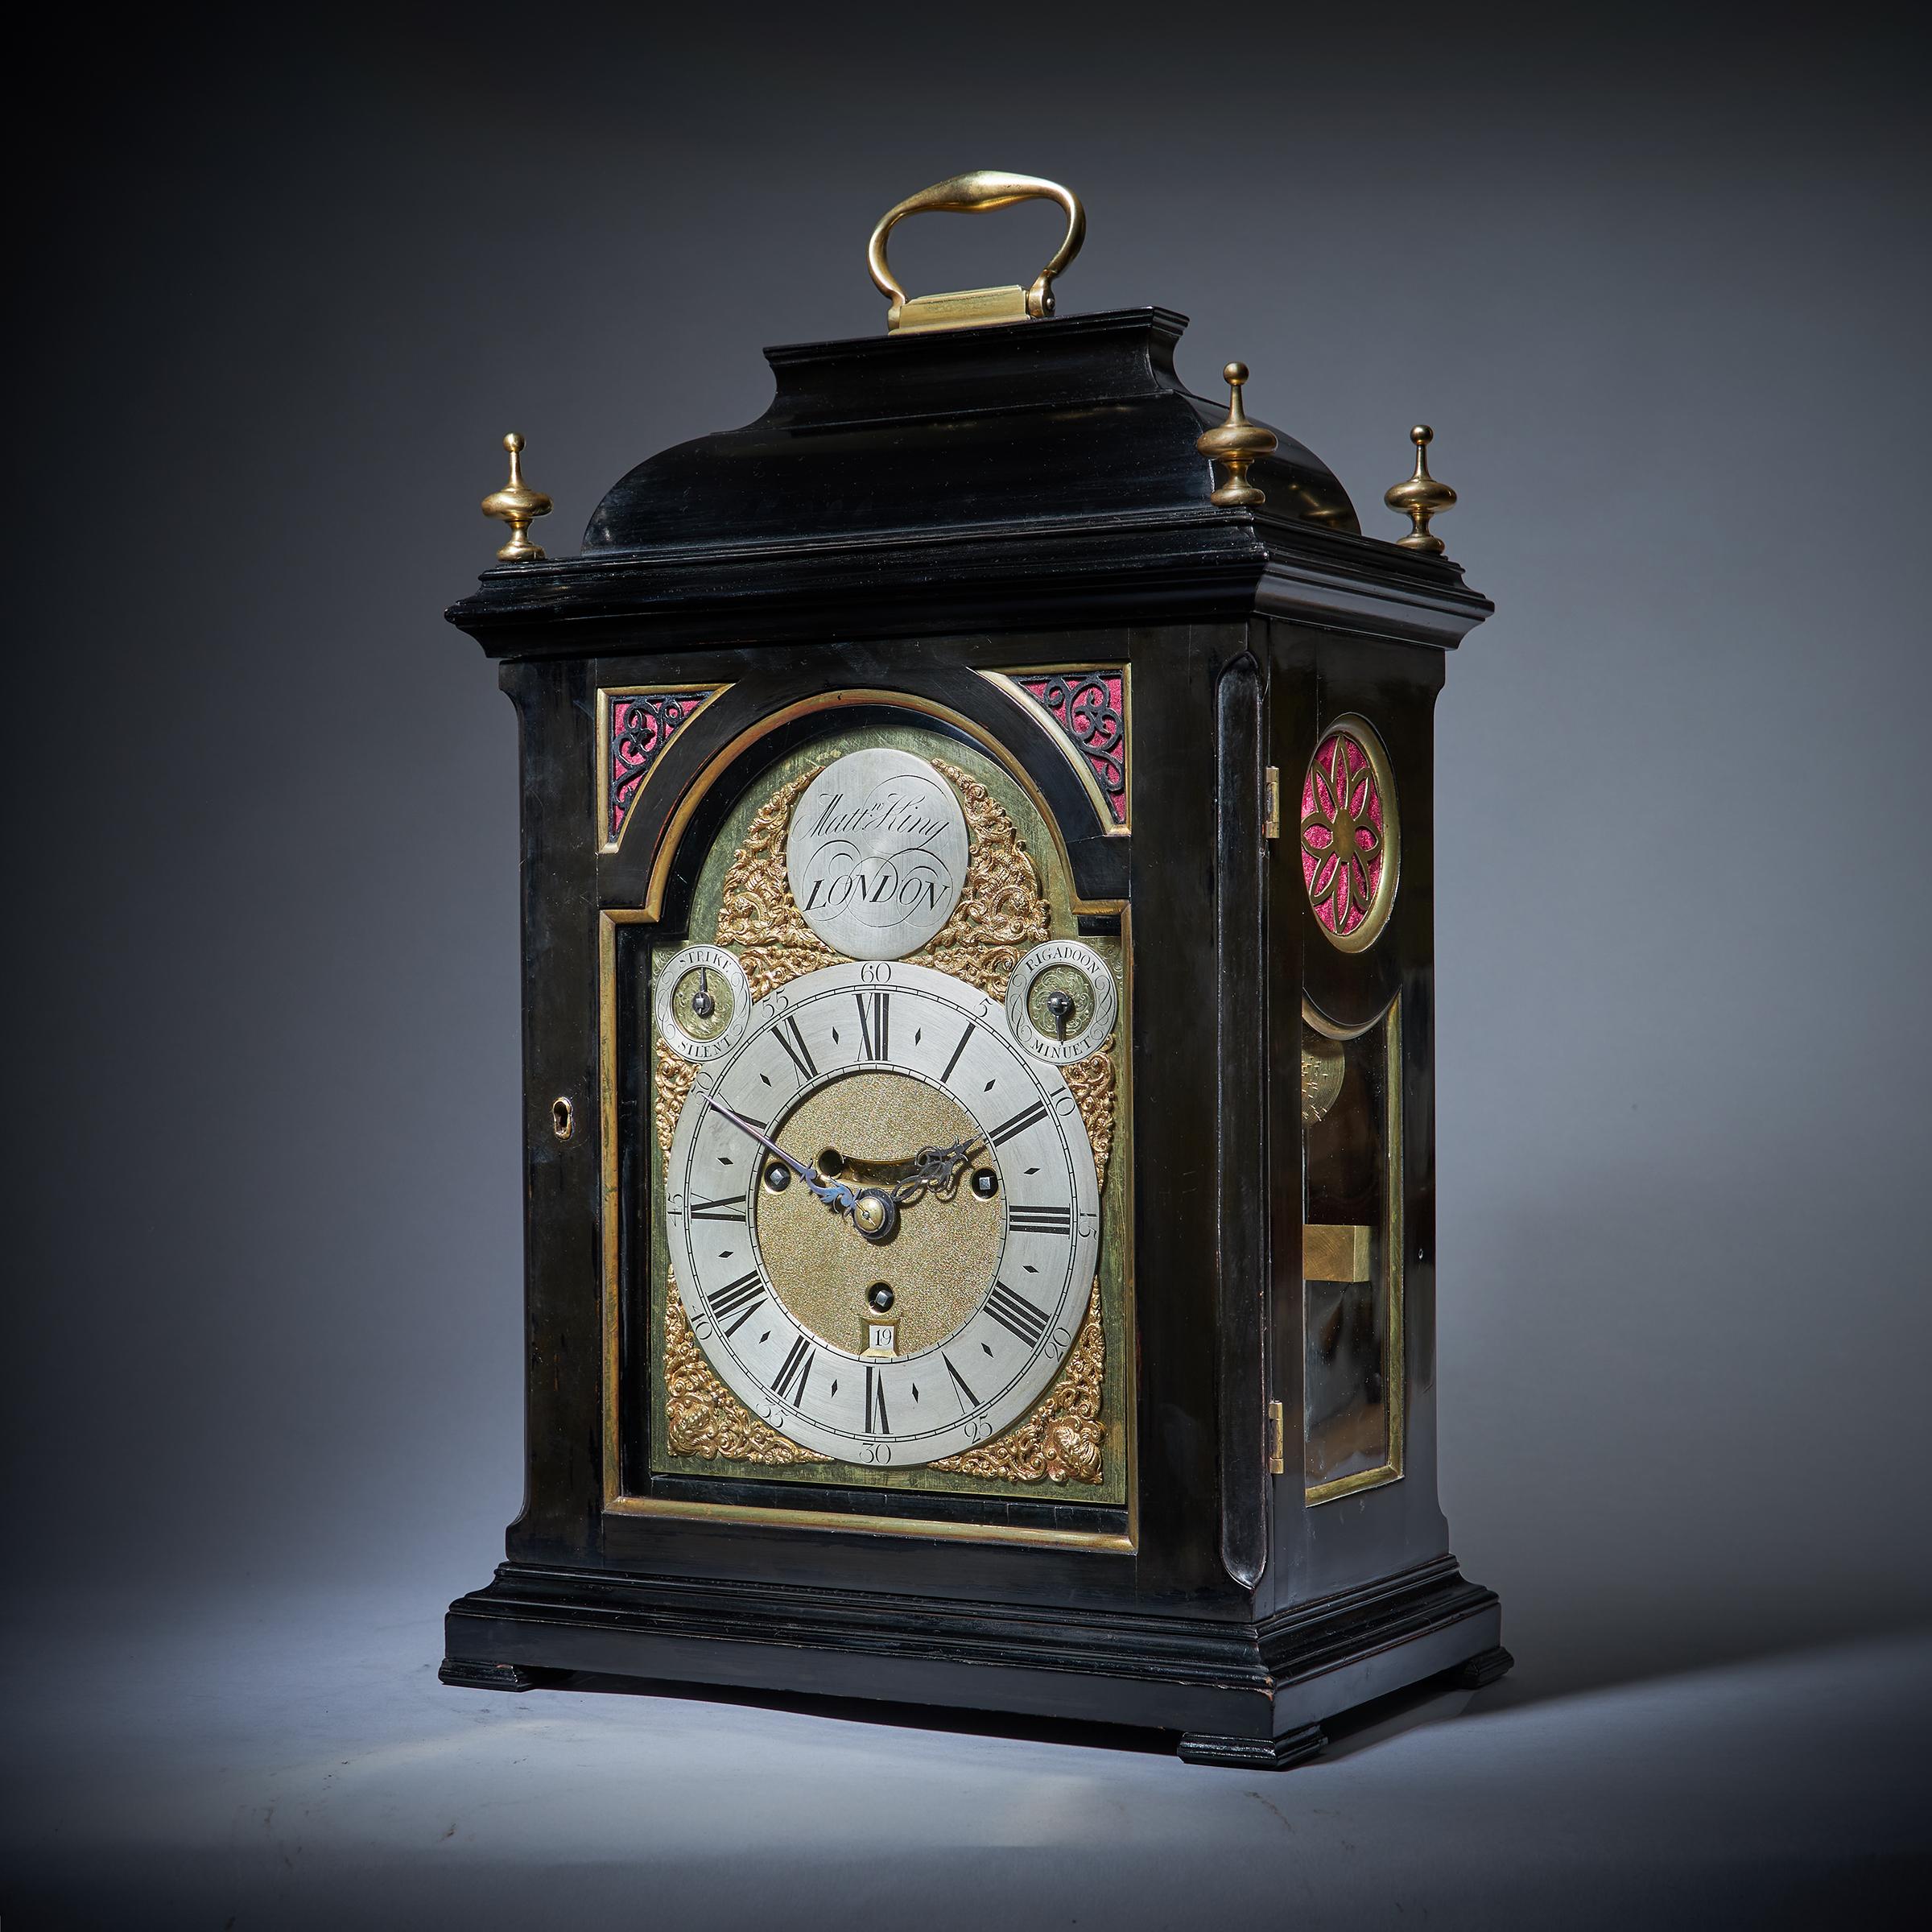 A rare George II musical table clock by Matthew King, circa 1735.

This unusual eight-day spring-driven table clock was made by Matthew King, who was active as a clockmaker in the second quarter of the 18th century. 
The impressive five knopped